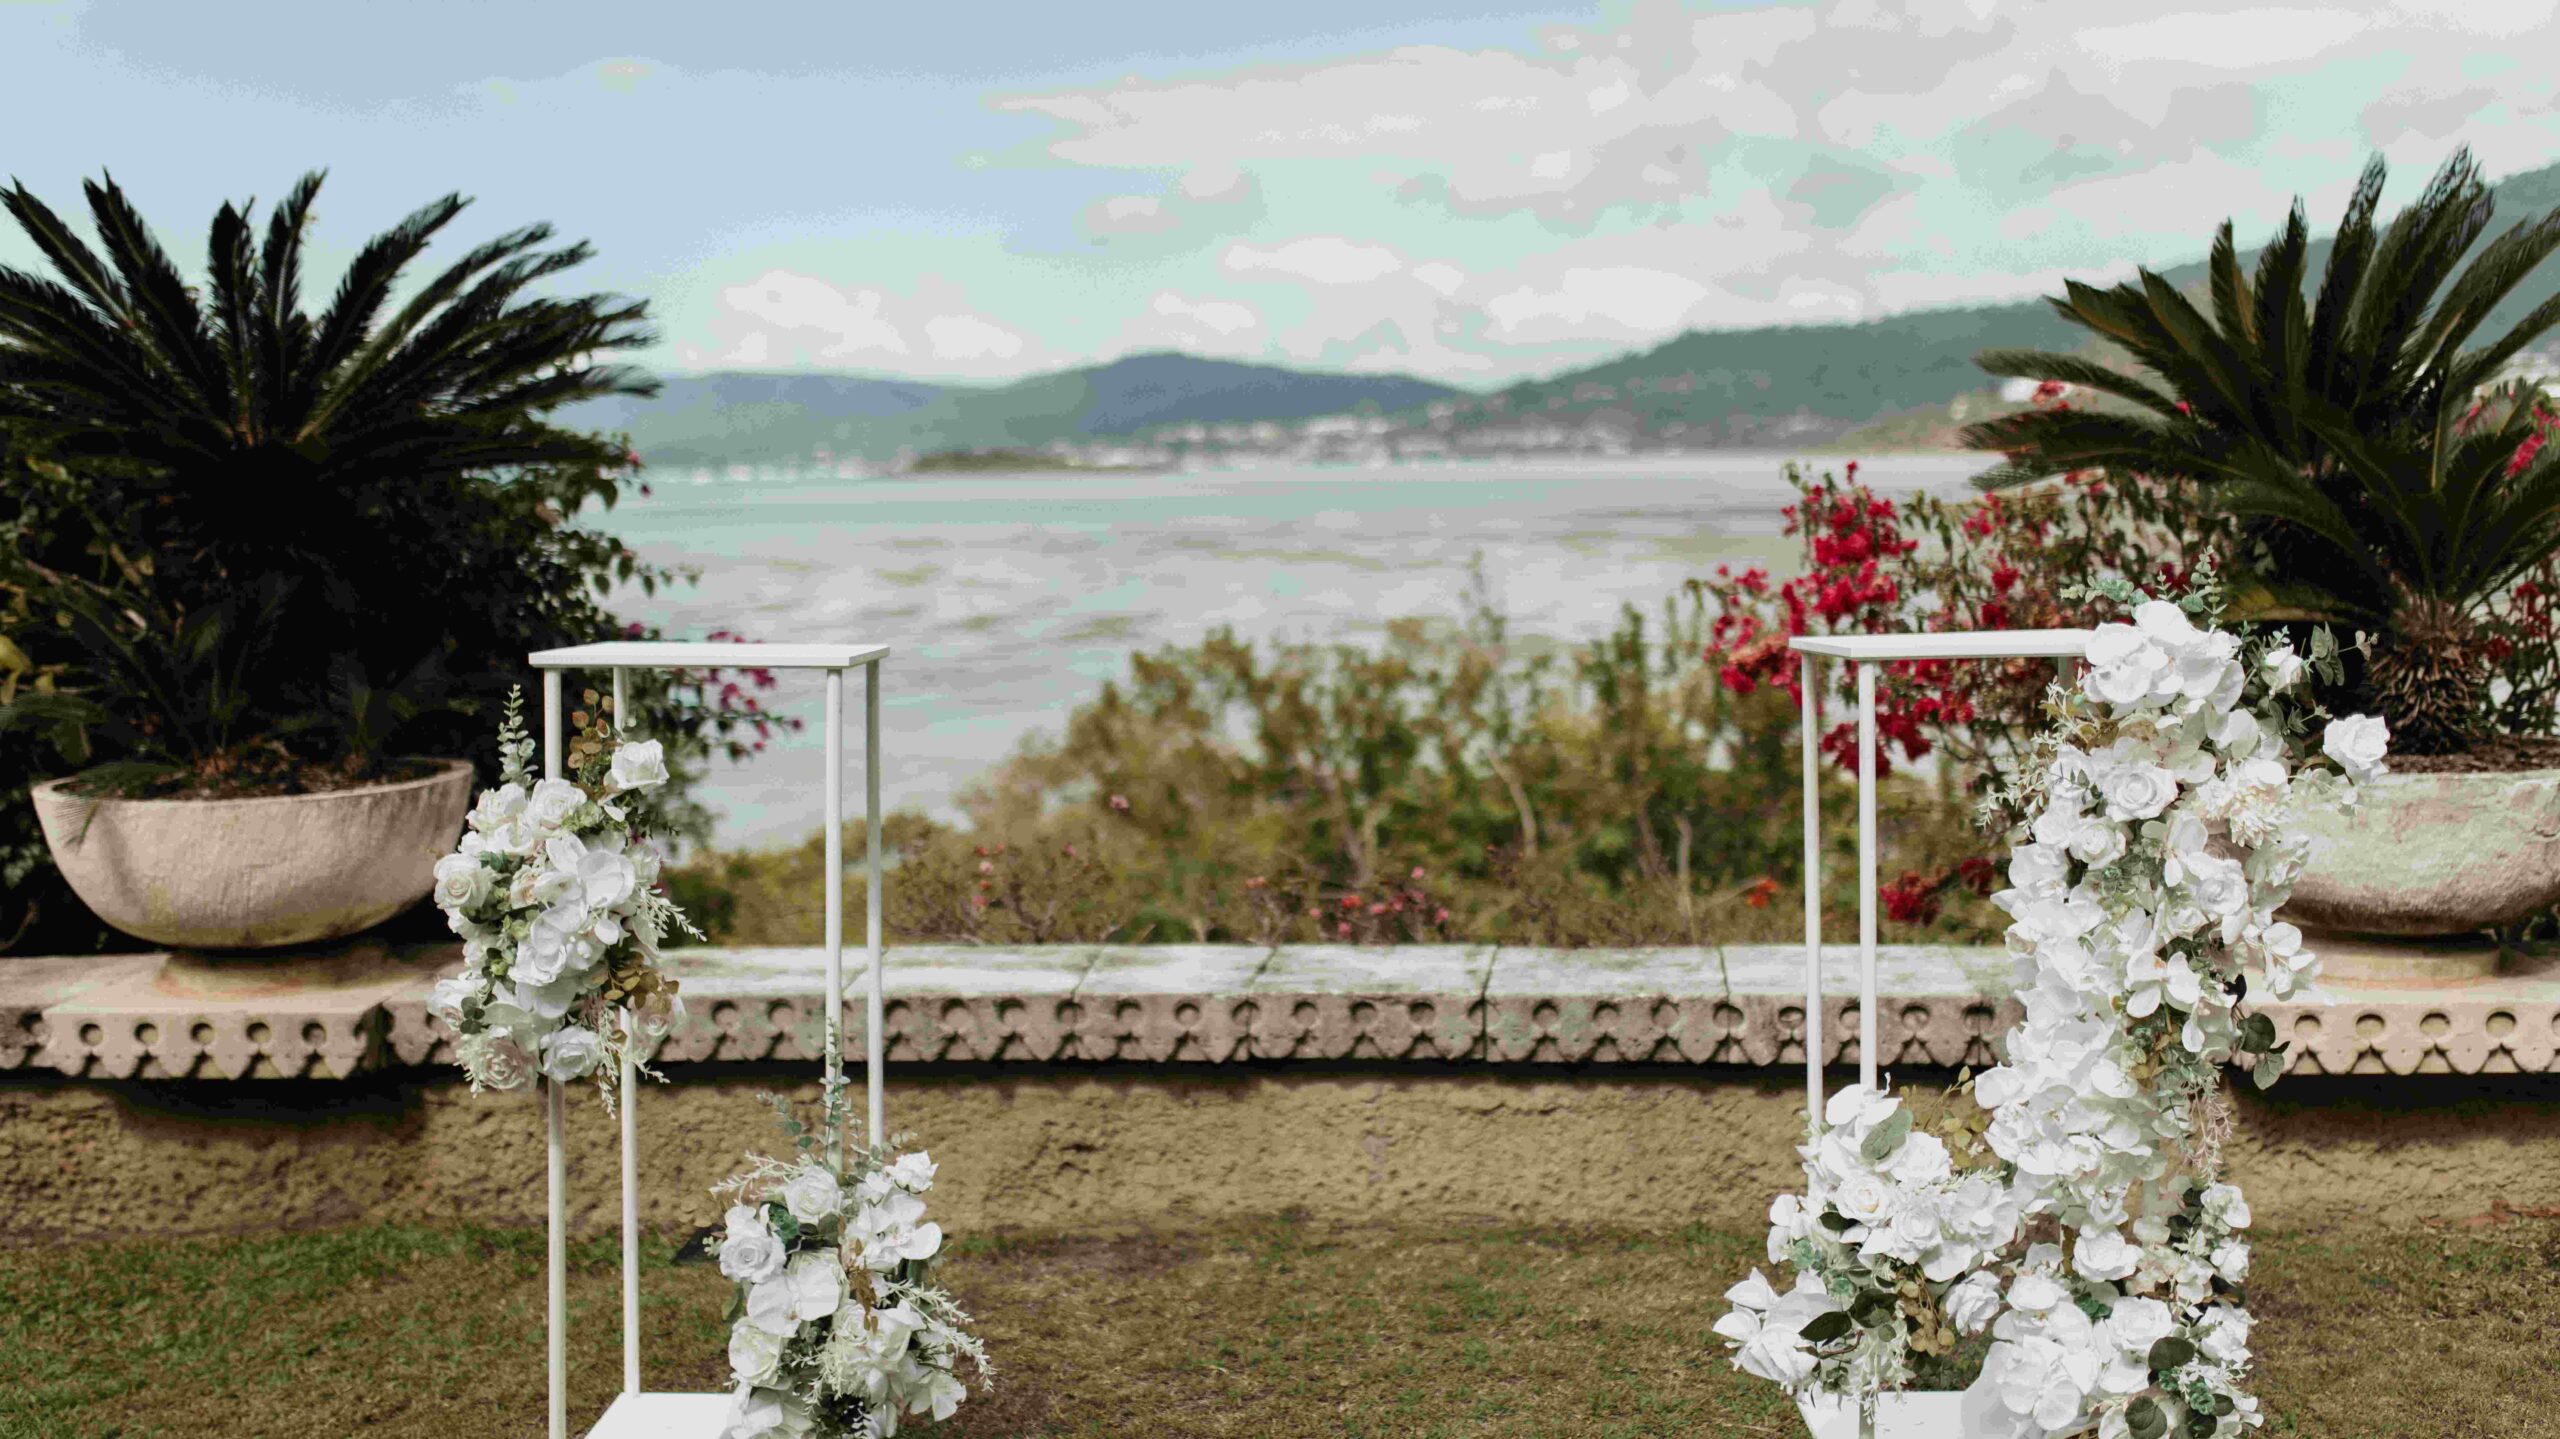 Real-wedding-Teagan-and-Luke-Villa-Botanica-Whitsundays-Australia-by-Rolling-Portraits-wedding-venue-with-wedding-arch-and-flowers-or-floral-decoration